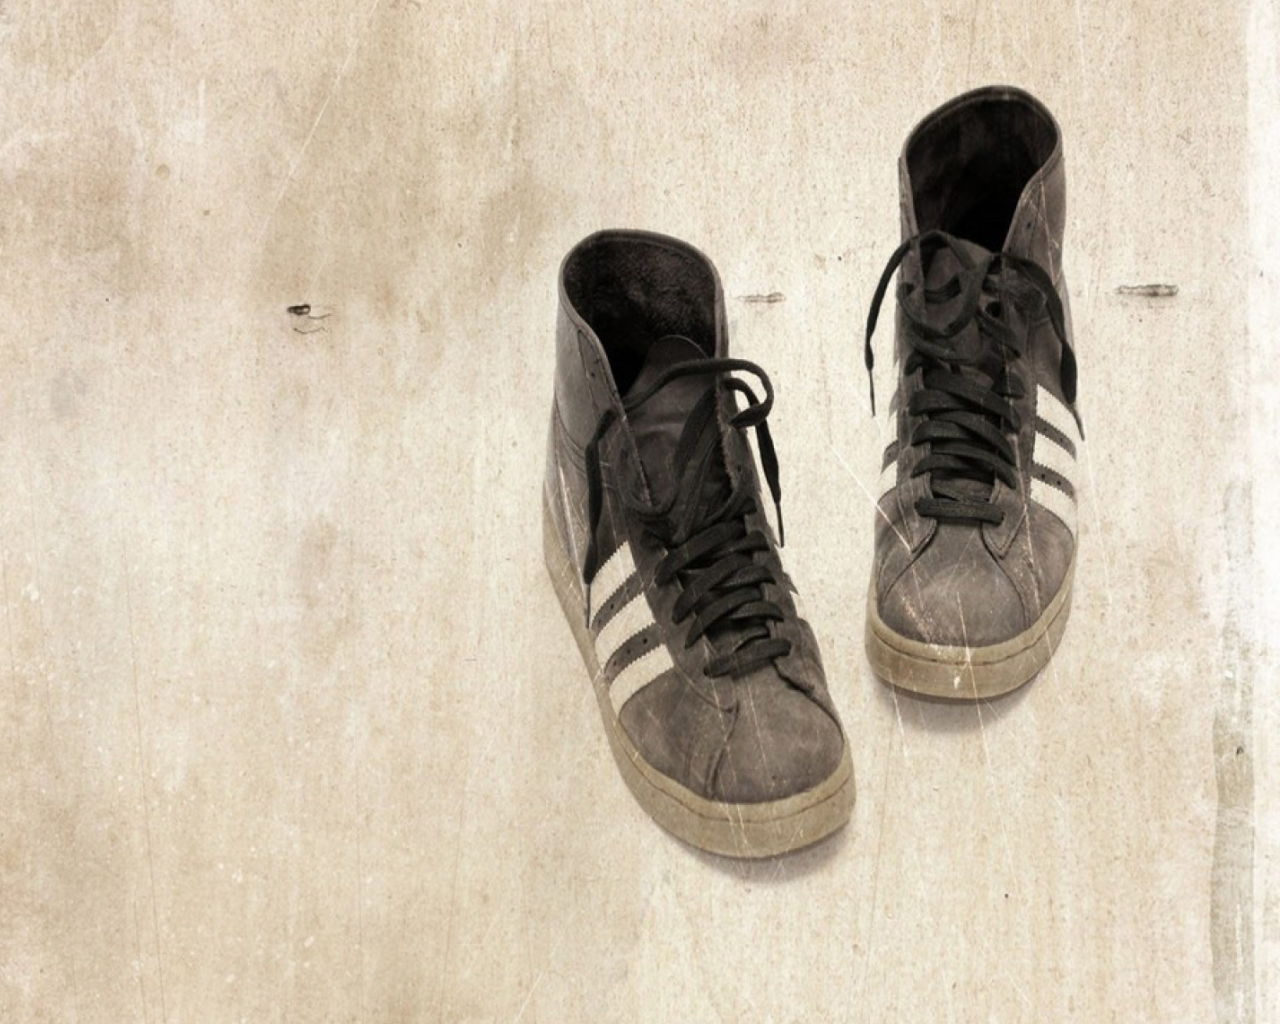 Grungy Sneakers wallpaper 1280x1024